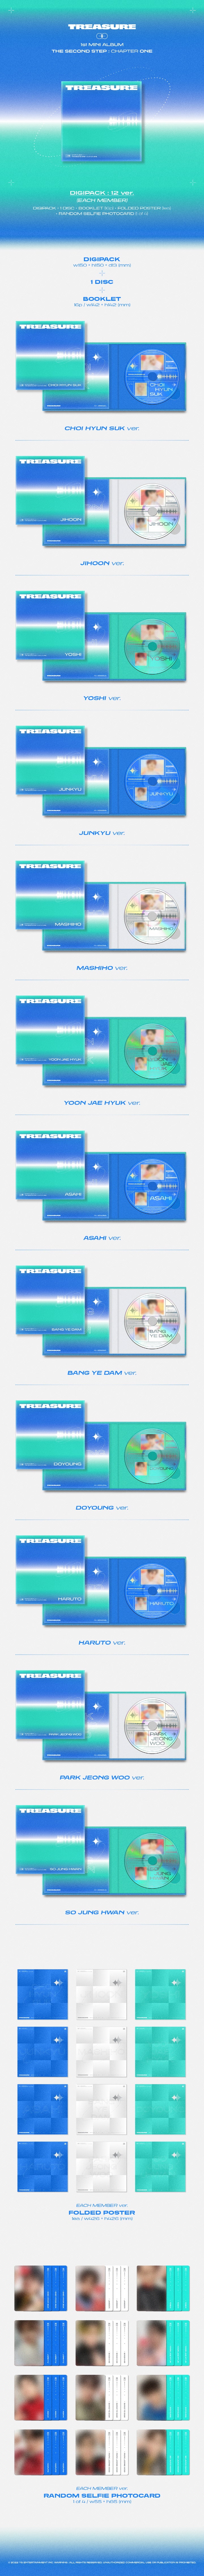 1 CD
1 Booklet (16 pages)
1 Folded Poster
1 Selfie Photo Card (random out of 4 per version)